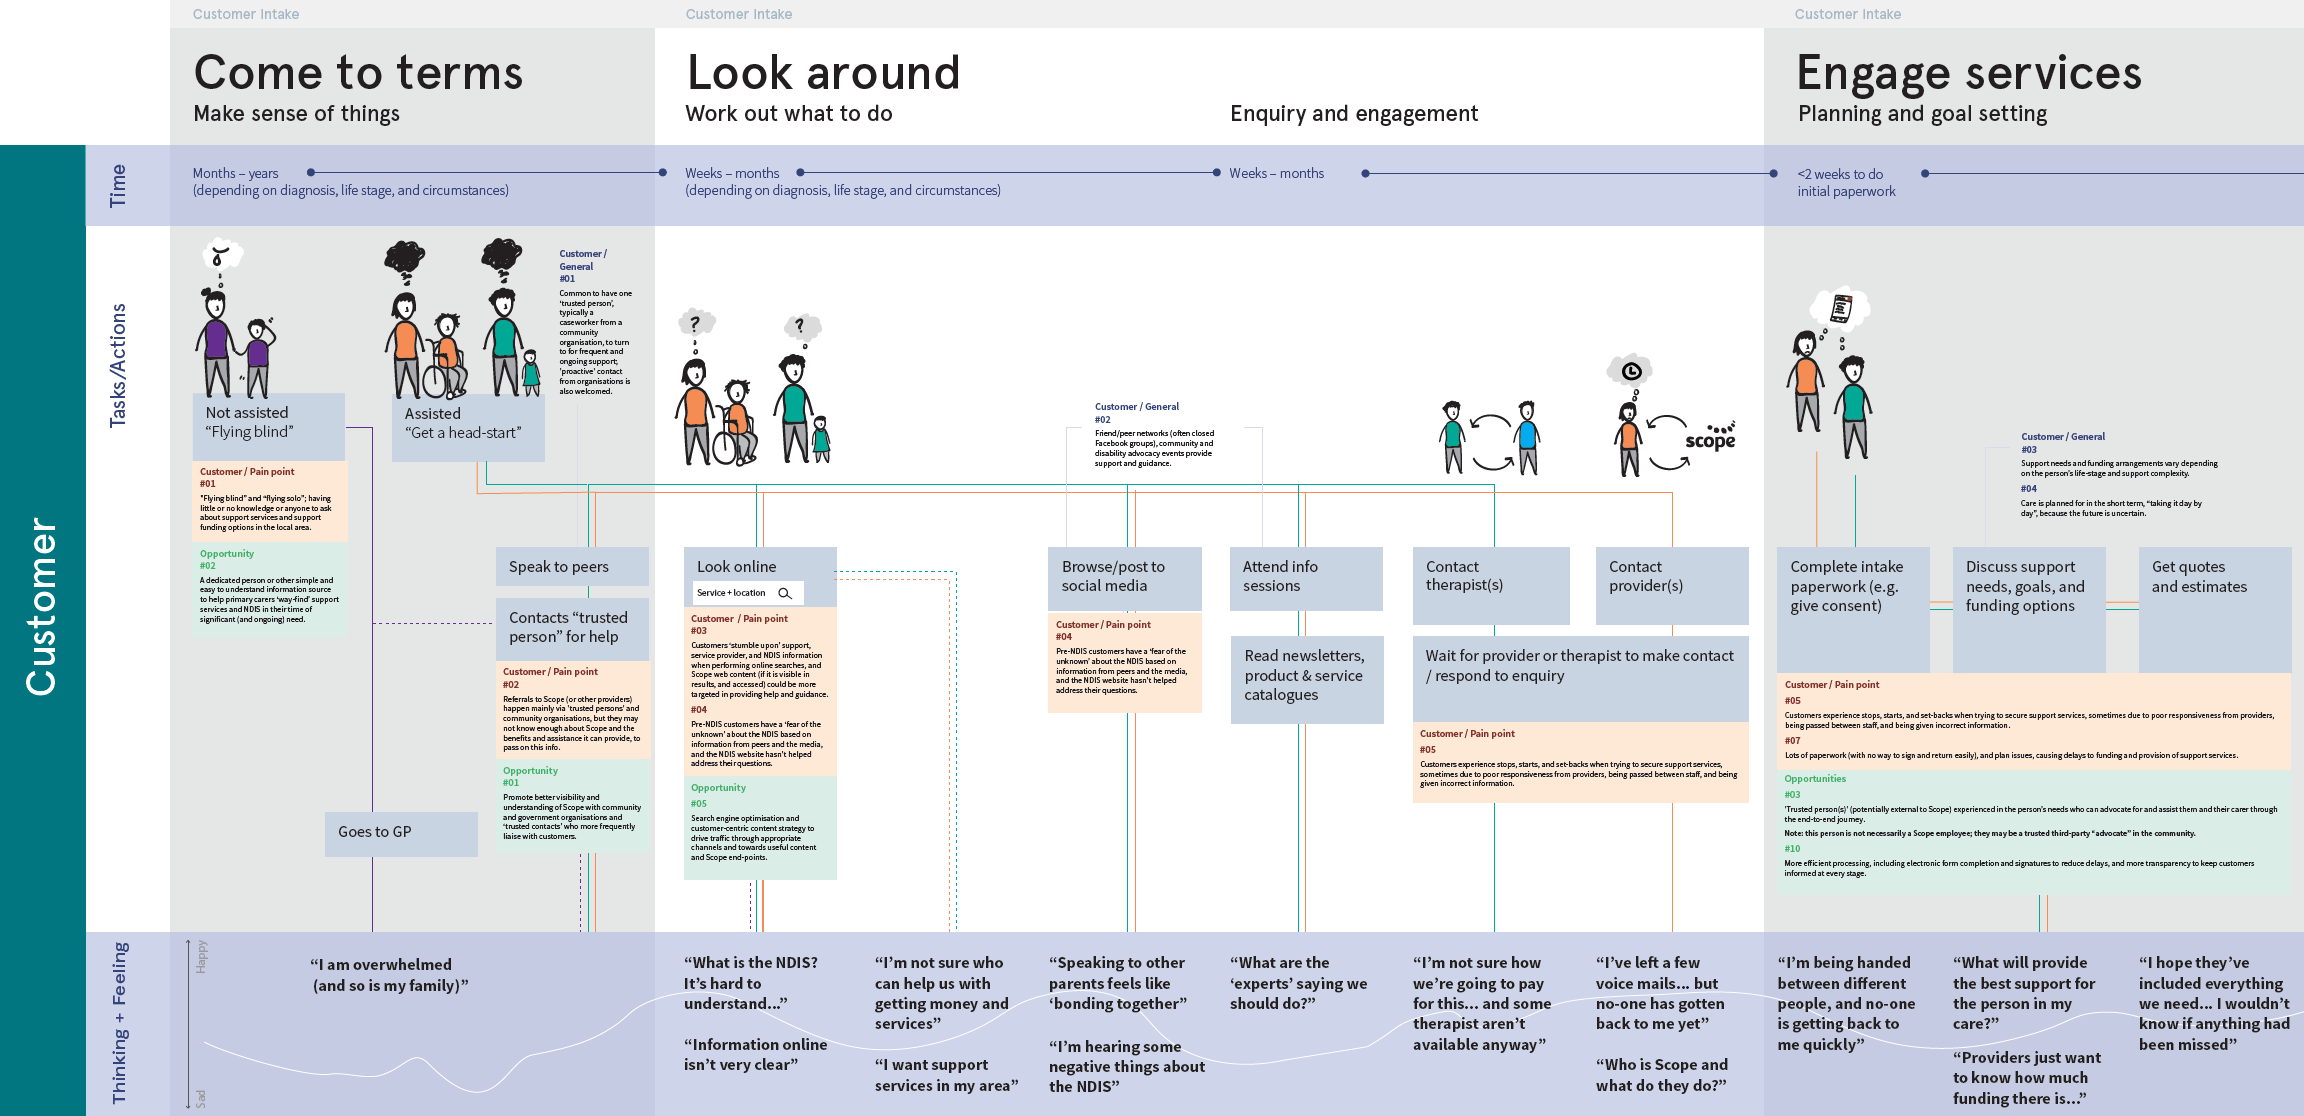 An excerpt from the current state customer journey map highlighting the time frames, tasks and actions and emotions that customers experience when engaging with Scope's services.